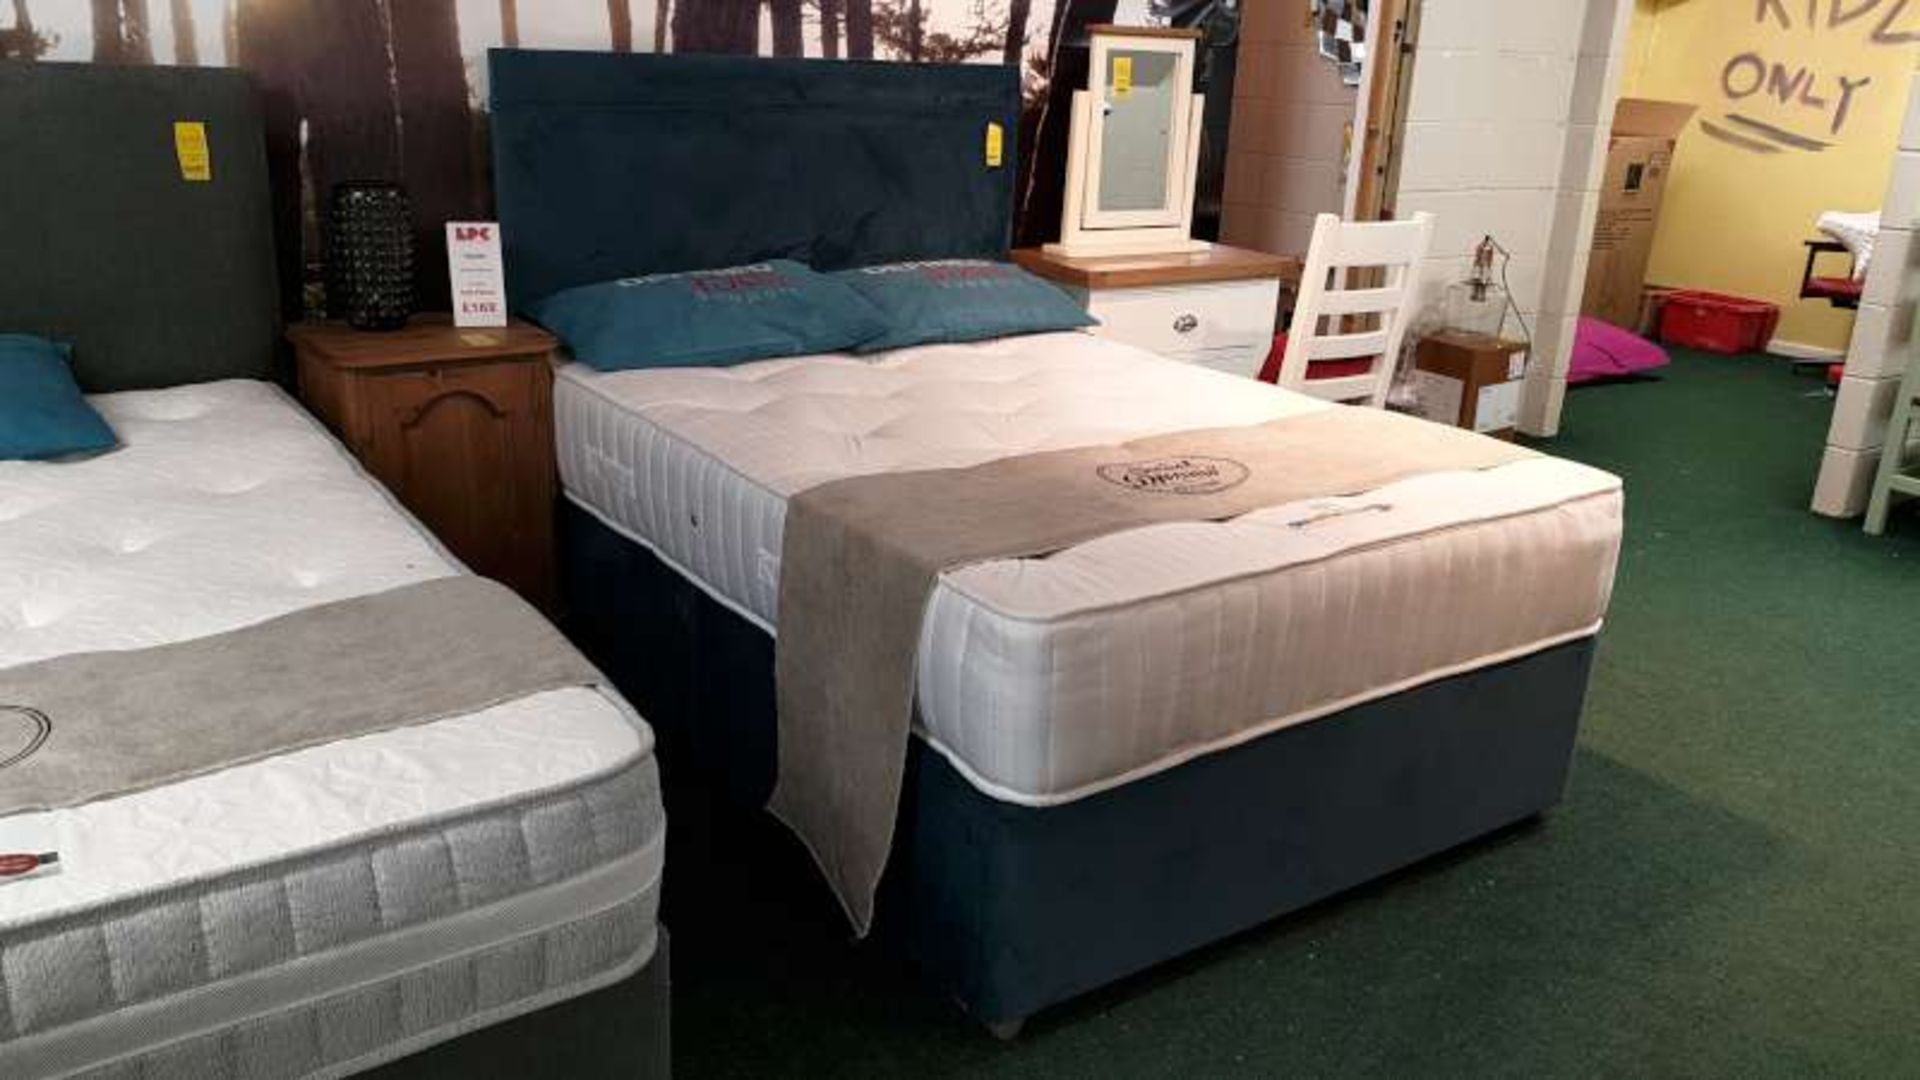 BLUE FABRIC DOUBLE BED COMPLETE WITH LAMBETH 800 MATTRESS TOTAL RRP £849